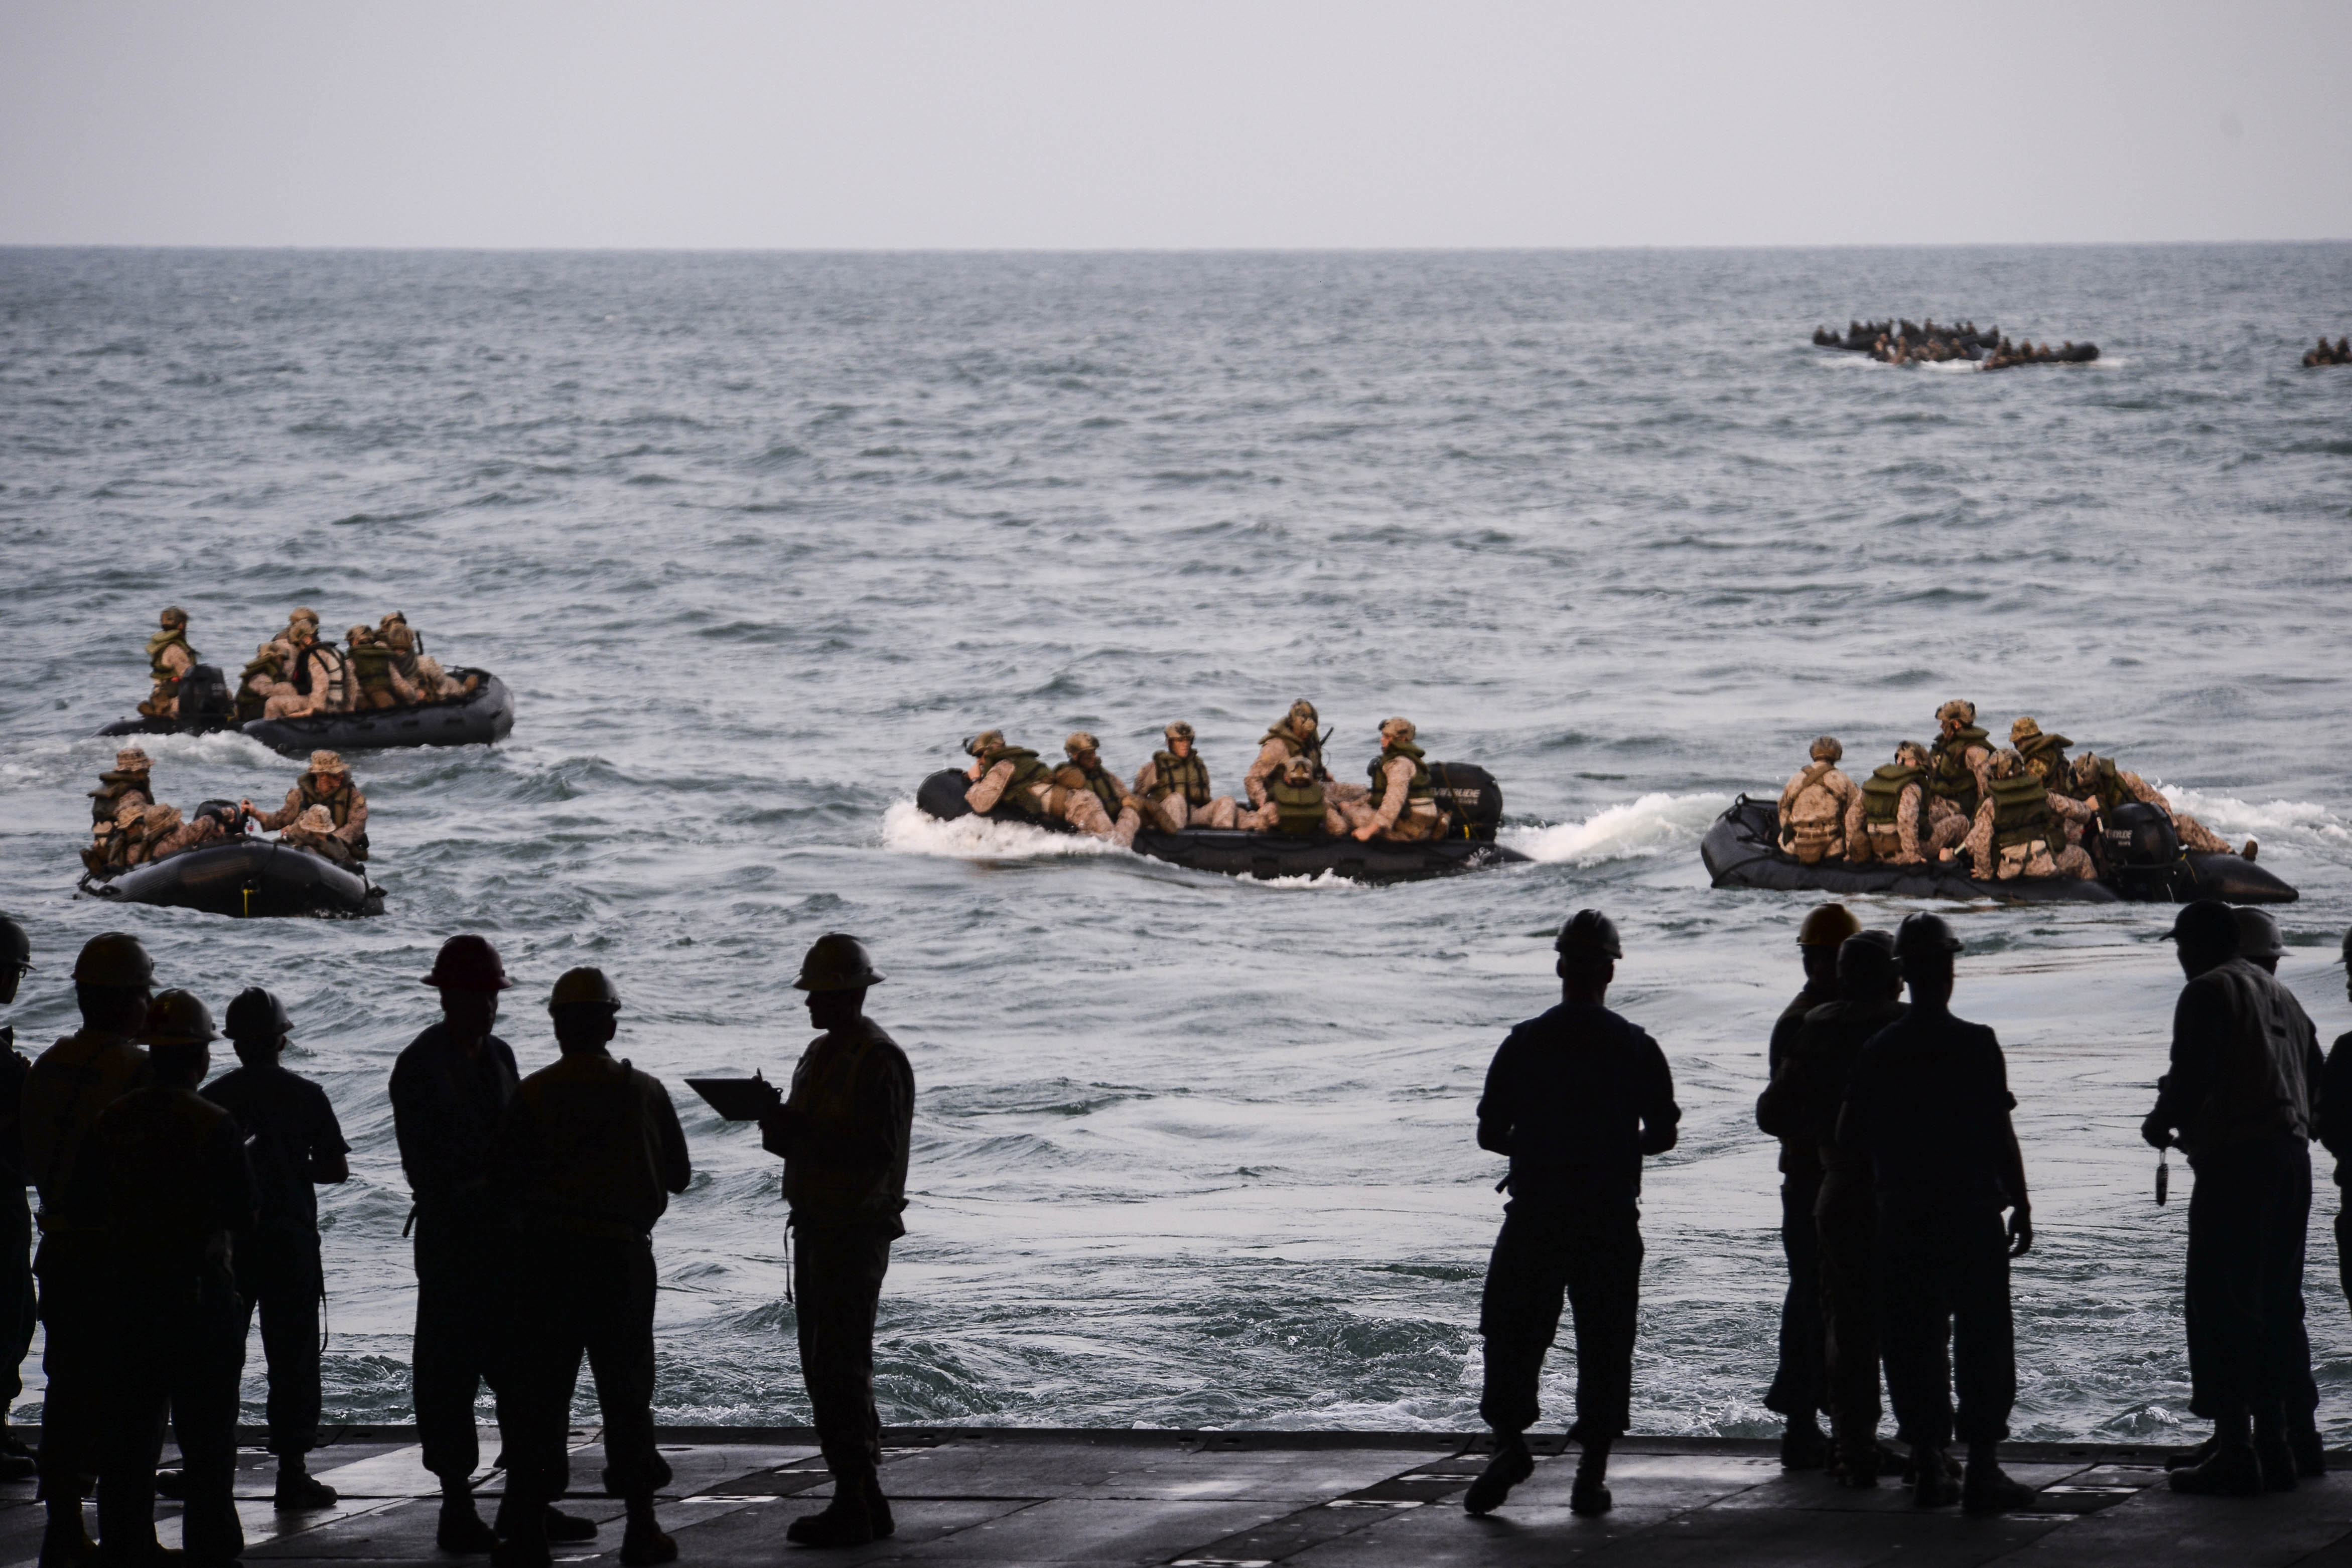 Sailors launch Marines assigned to the 31st Marine Expeditionary Unit (31st MEU) and soldiers assigned the Japan Ground Self Defense Force from the well-deck of the amphibious transport dock ship USS Green Bay (LPD 20) during amphibious assault training in June 2015. US Navy photo.